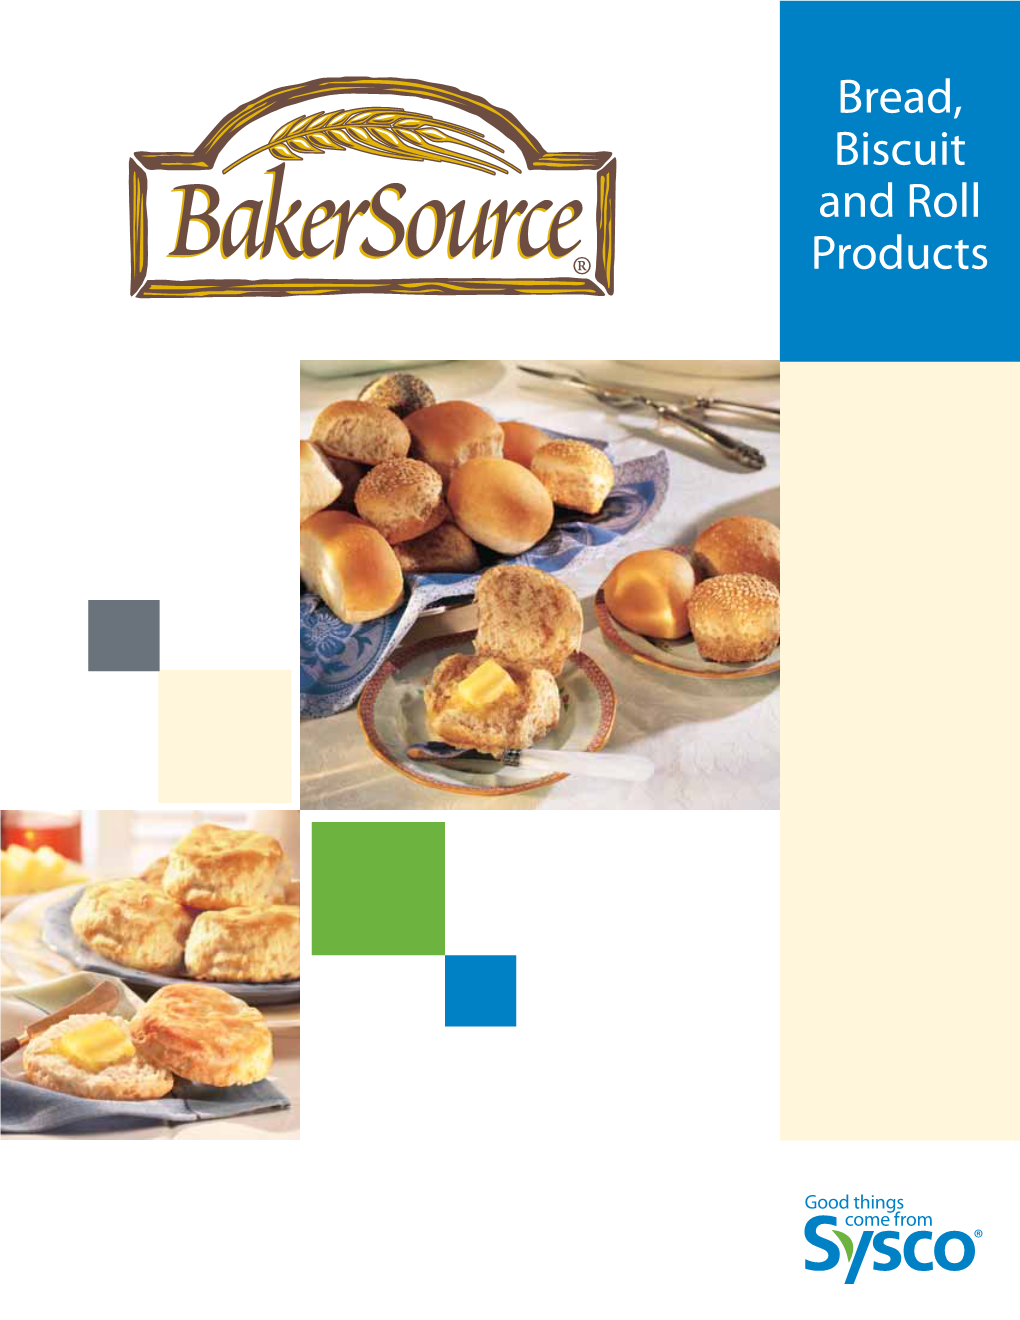 Bread, Biscuit and Roll Products Bakersource Bread, Biscuit and Roll Products